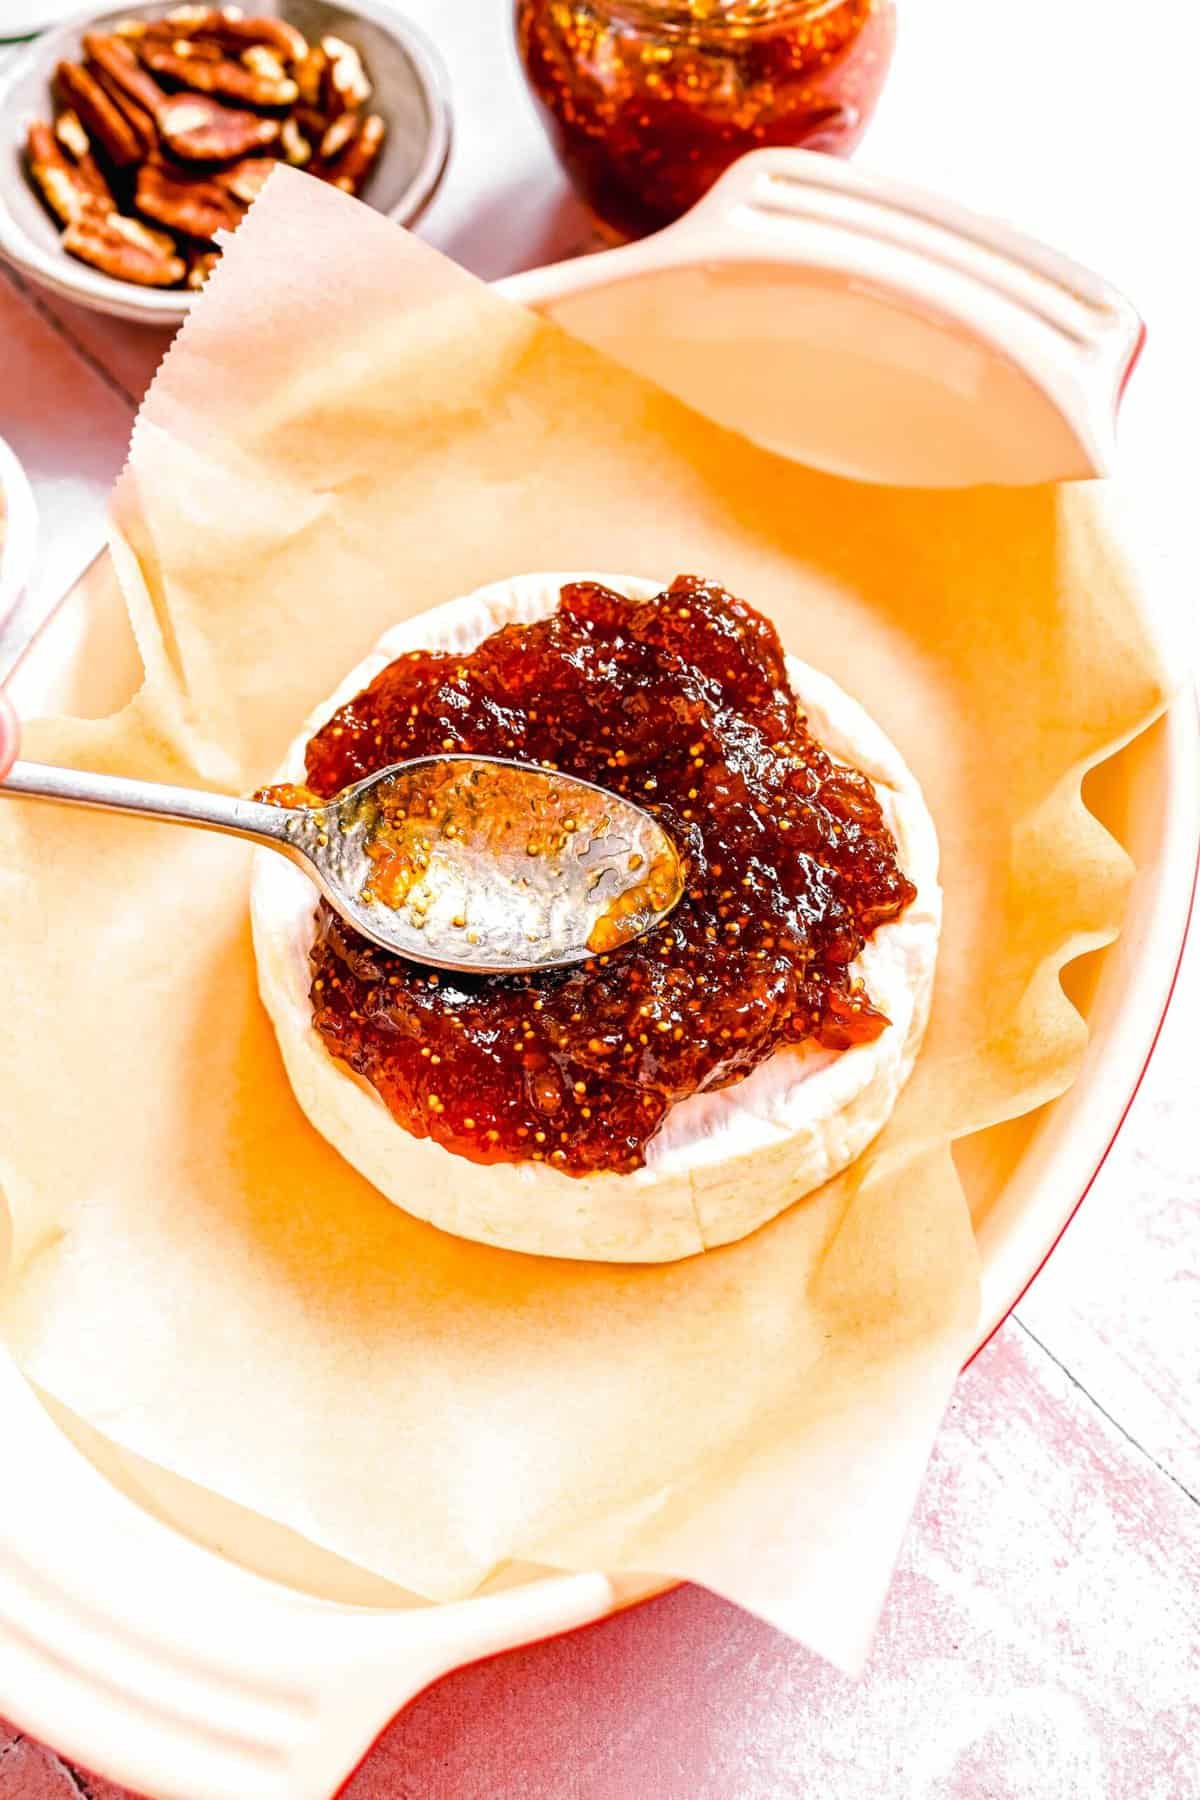 image of fig jam being spread on top of wheel of baked brie in a baking dish